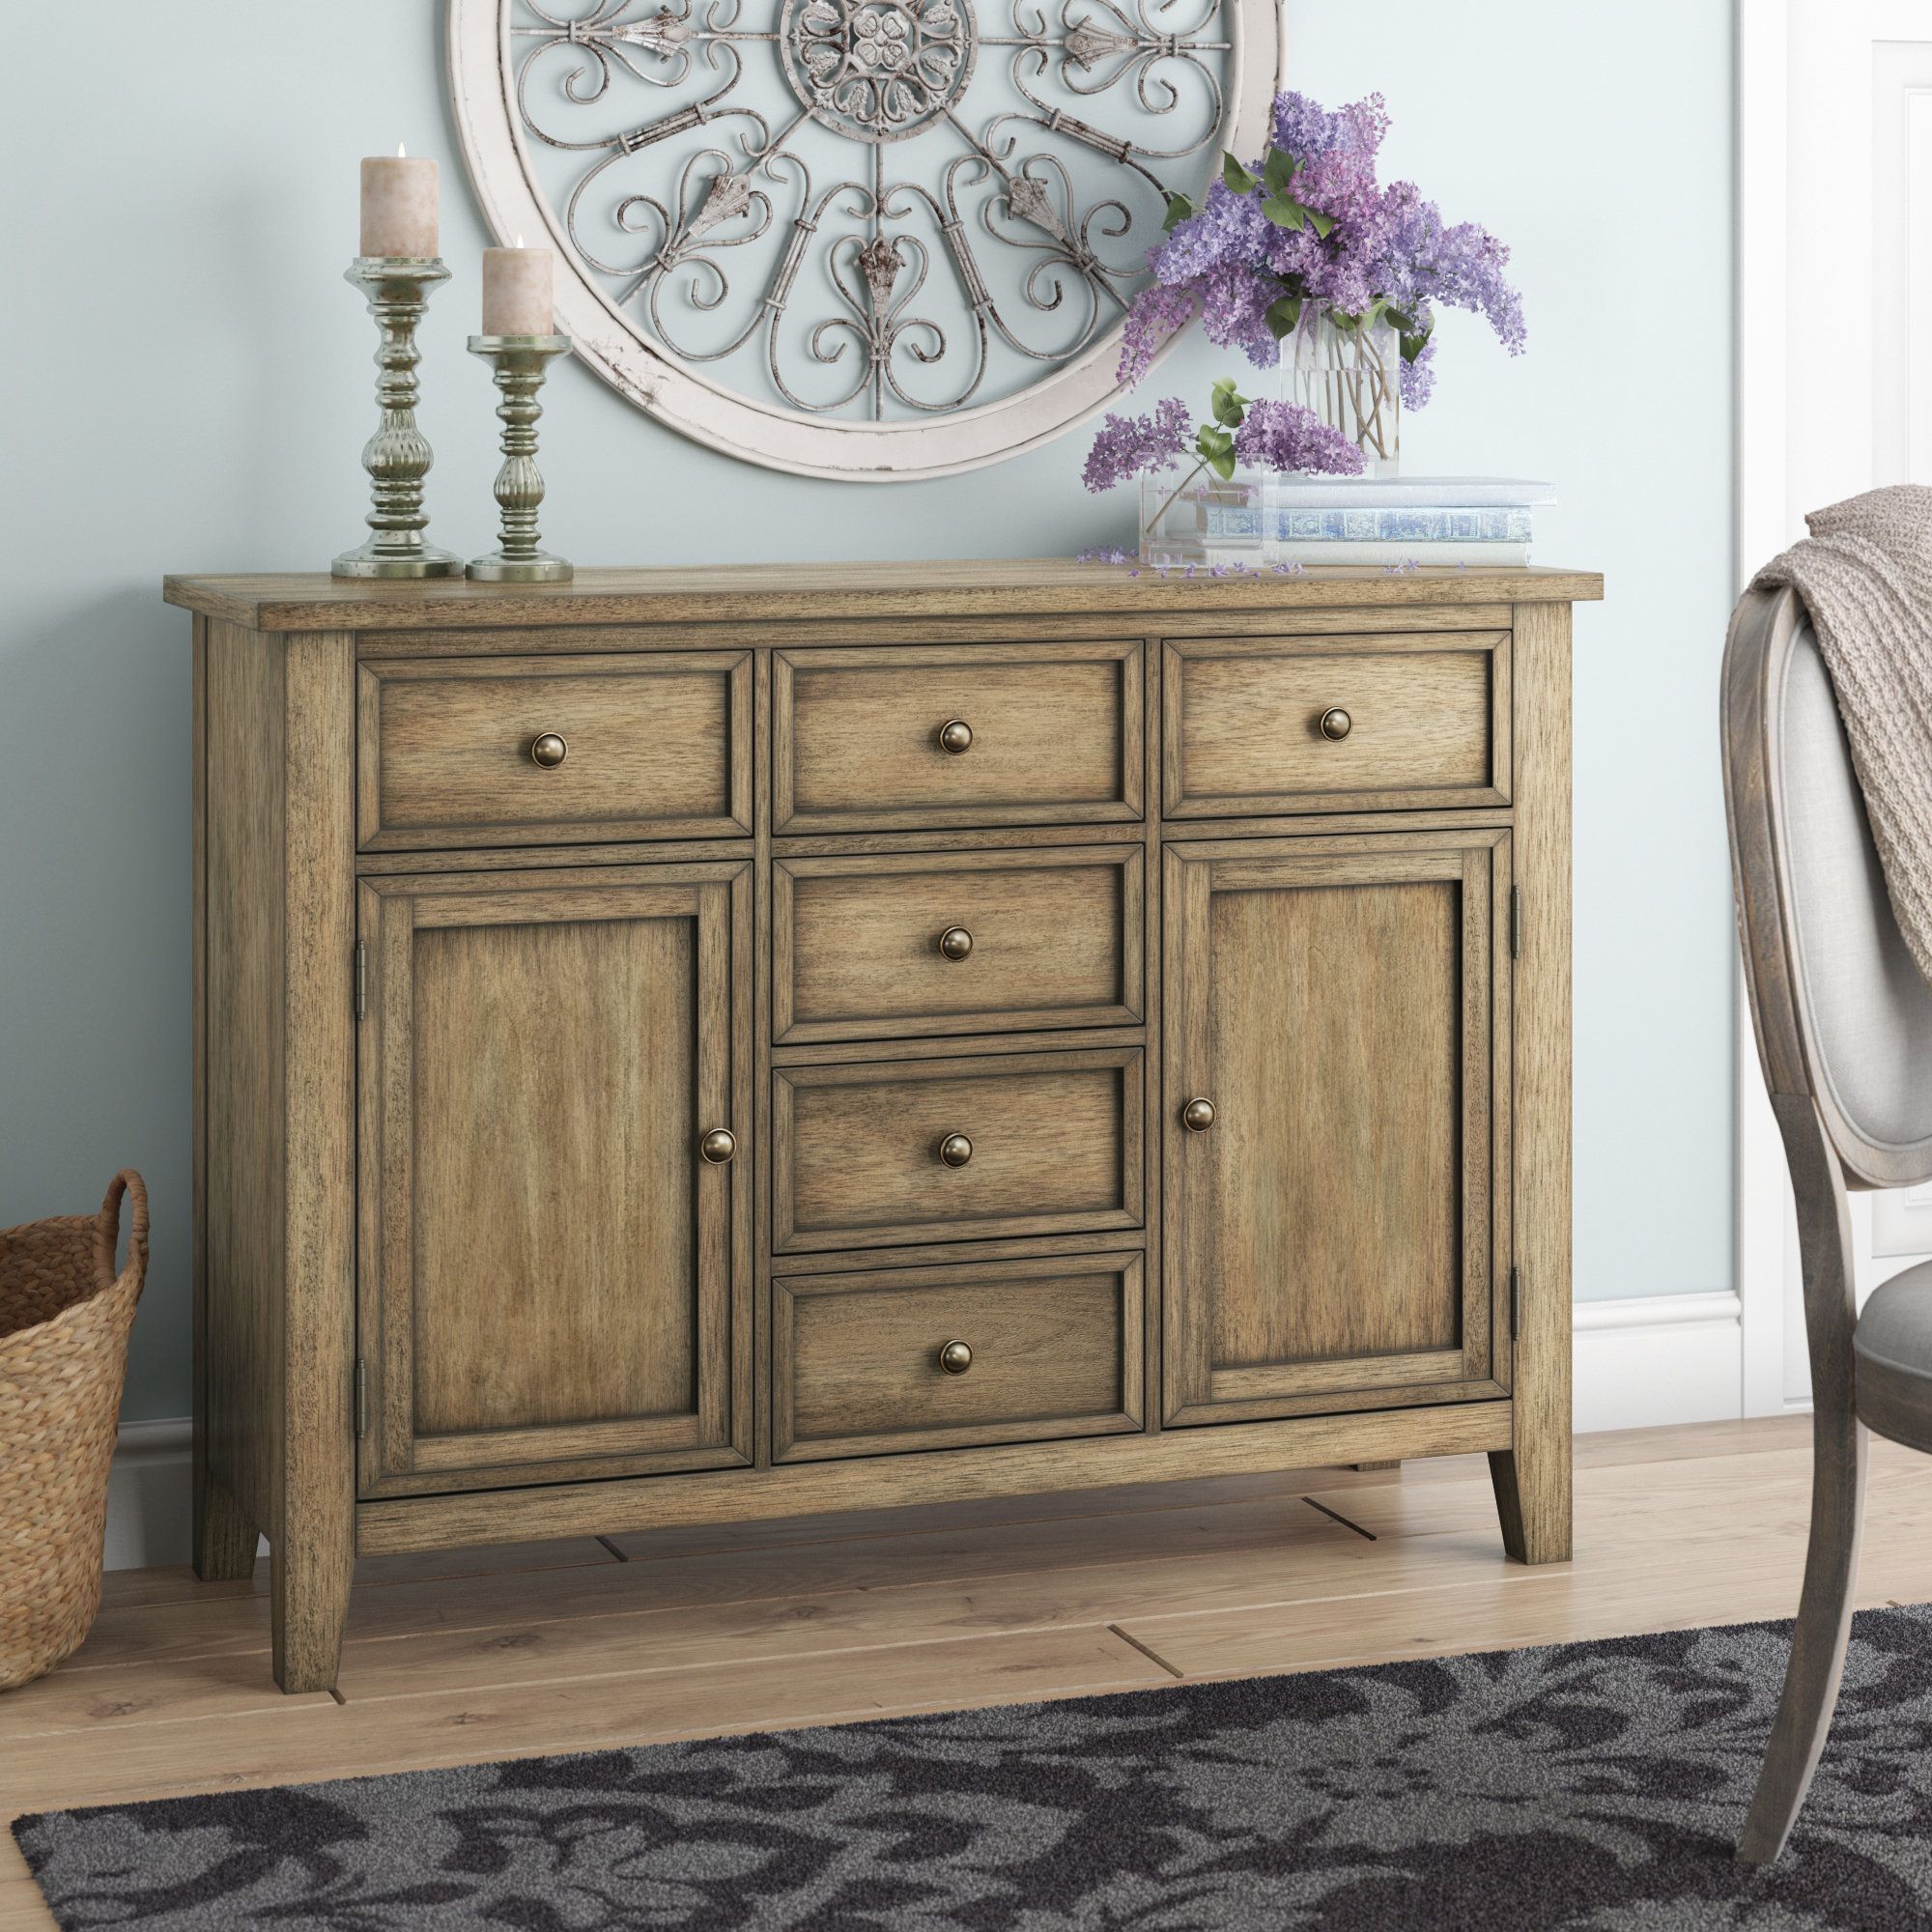 Saint Gratien Sideboard With 2017 Whitten Sideboards (View 5 of 20)